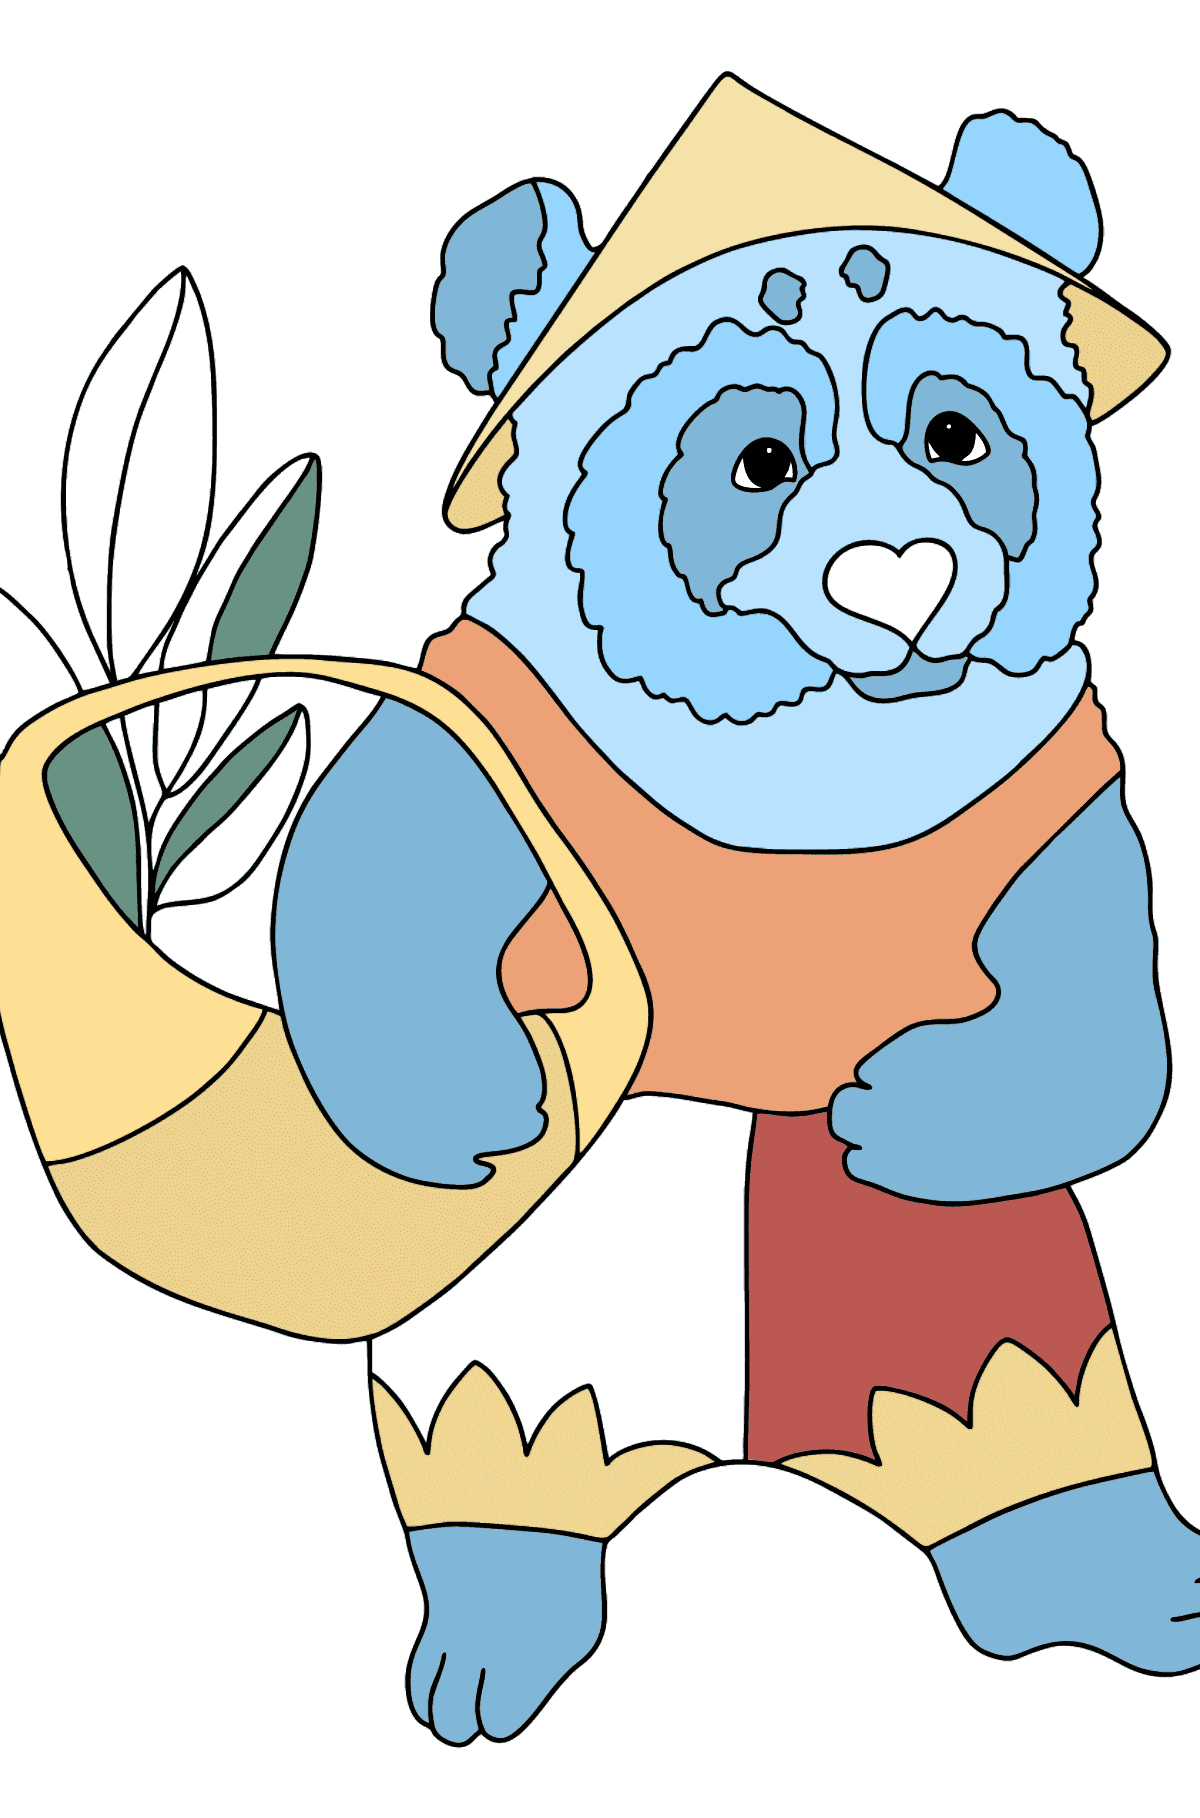 Coloring Page - A Panda with a Crop Basket - Coloring Pages for Kids